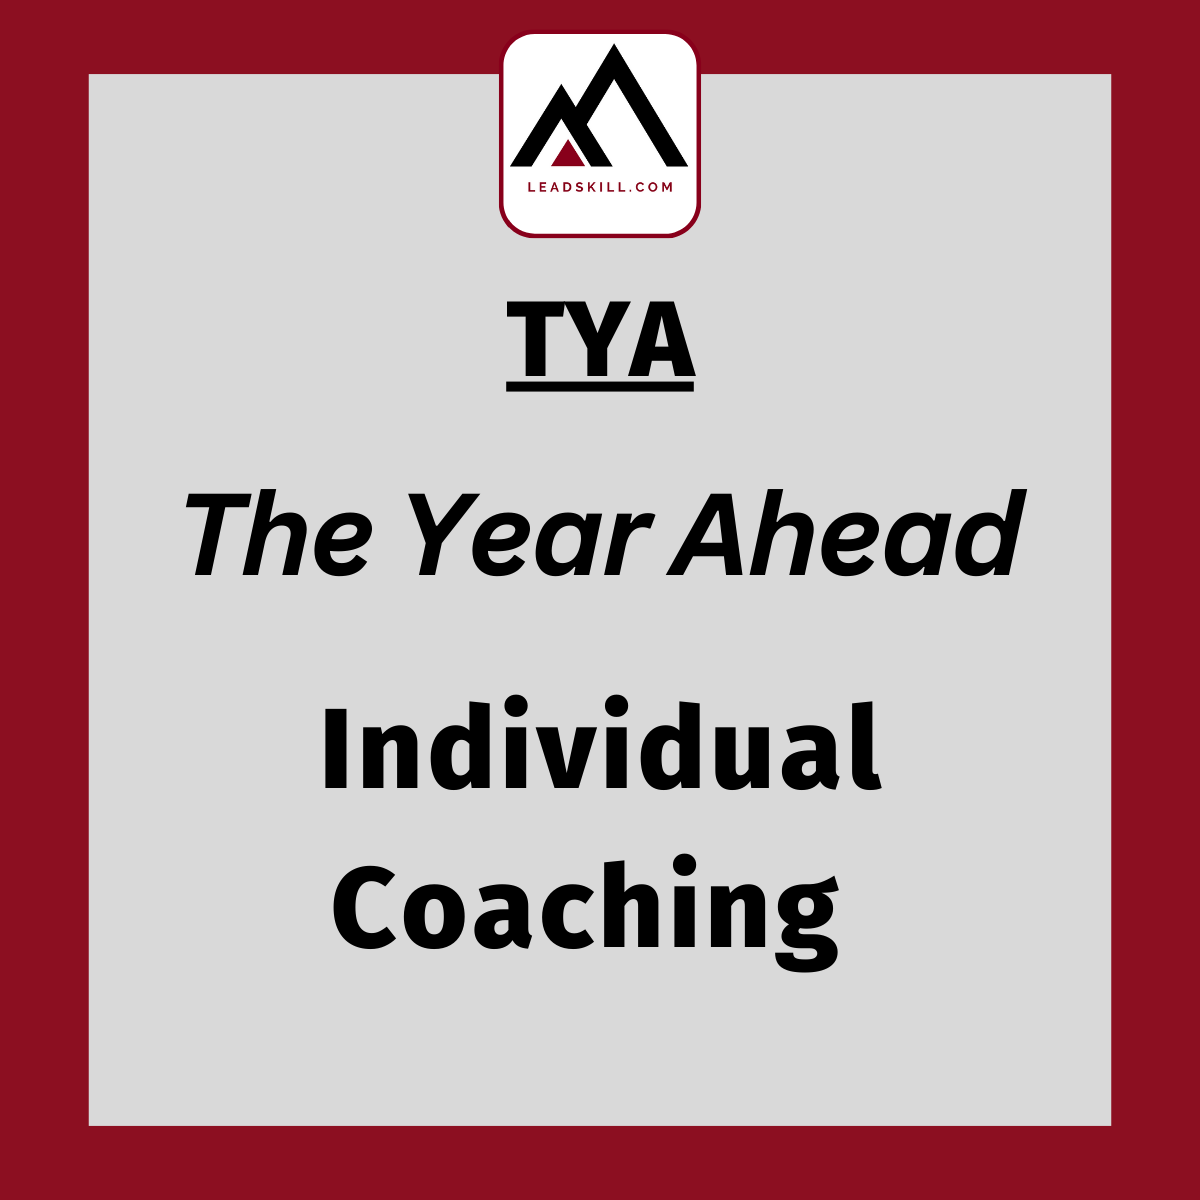 The Year Ahead Individual Coaching with Leadskill logo and a red border